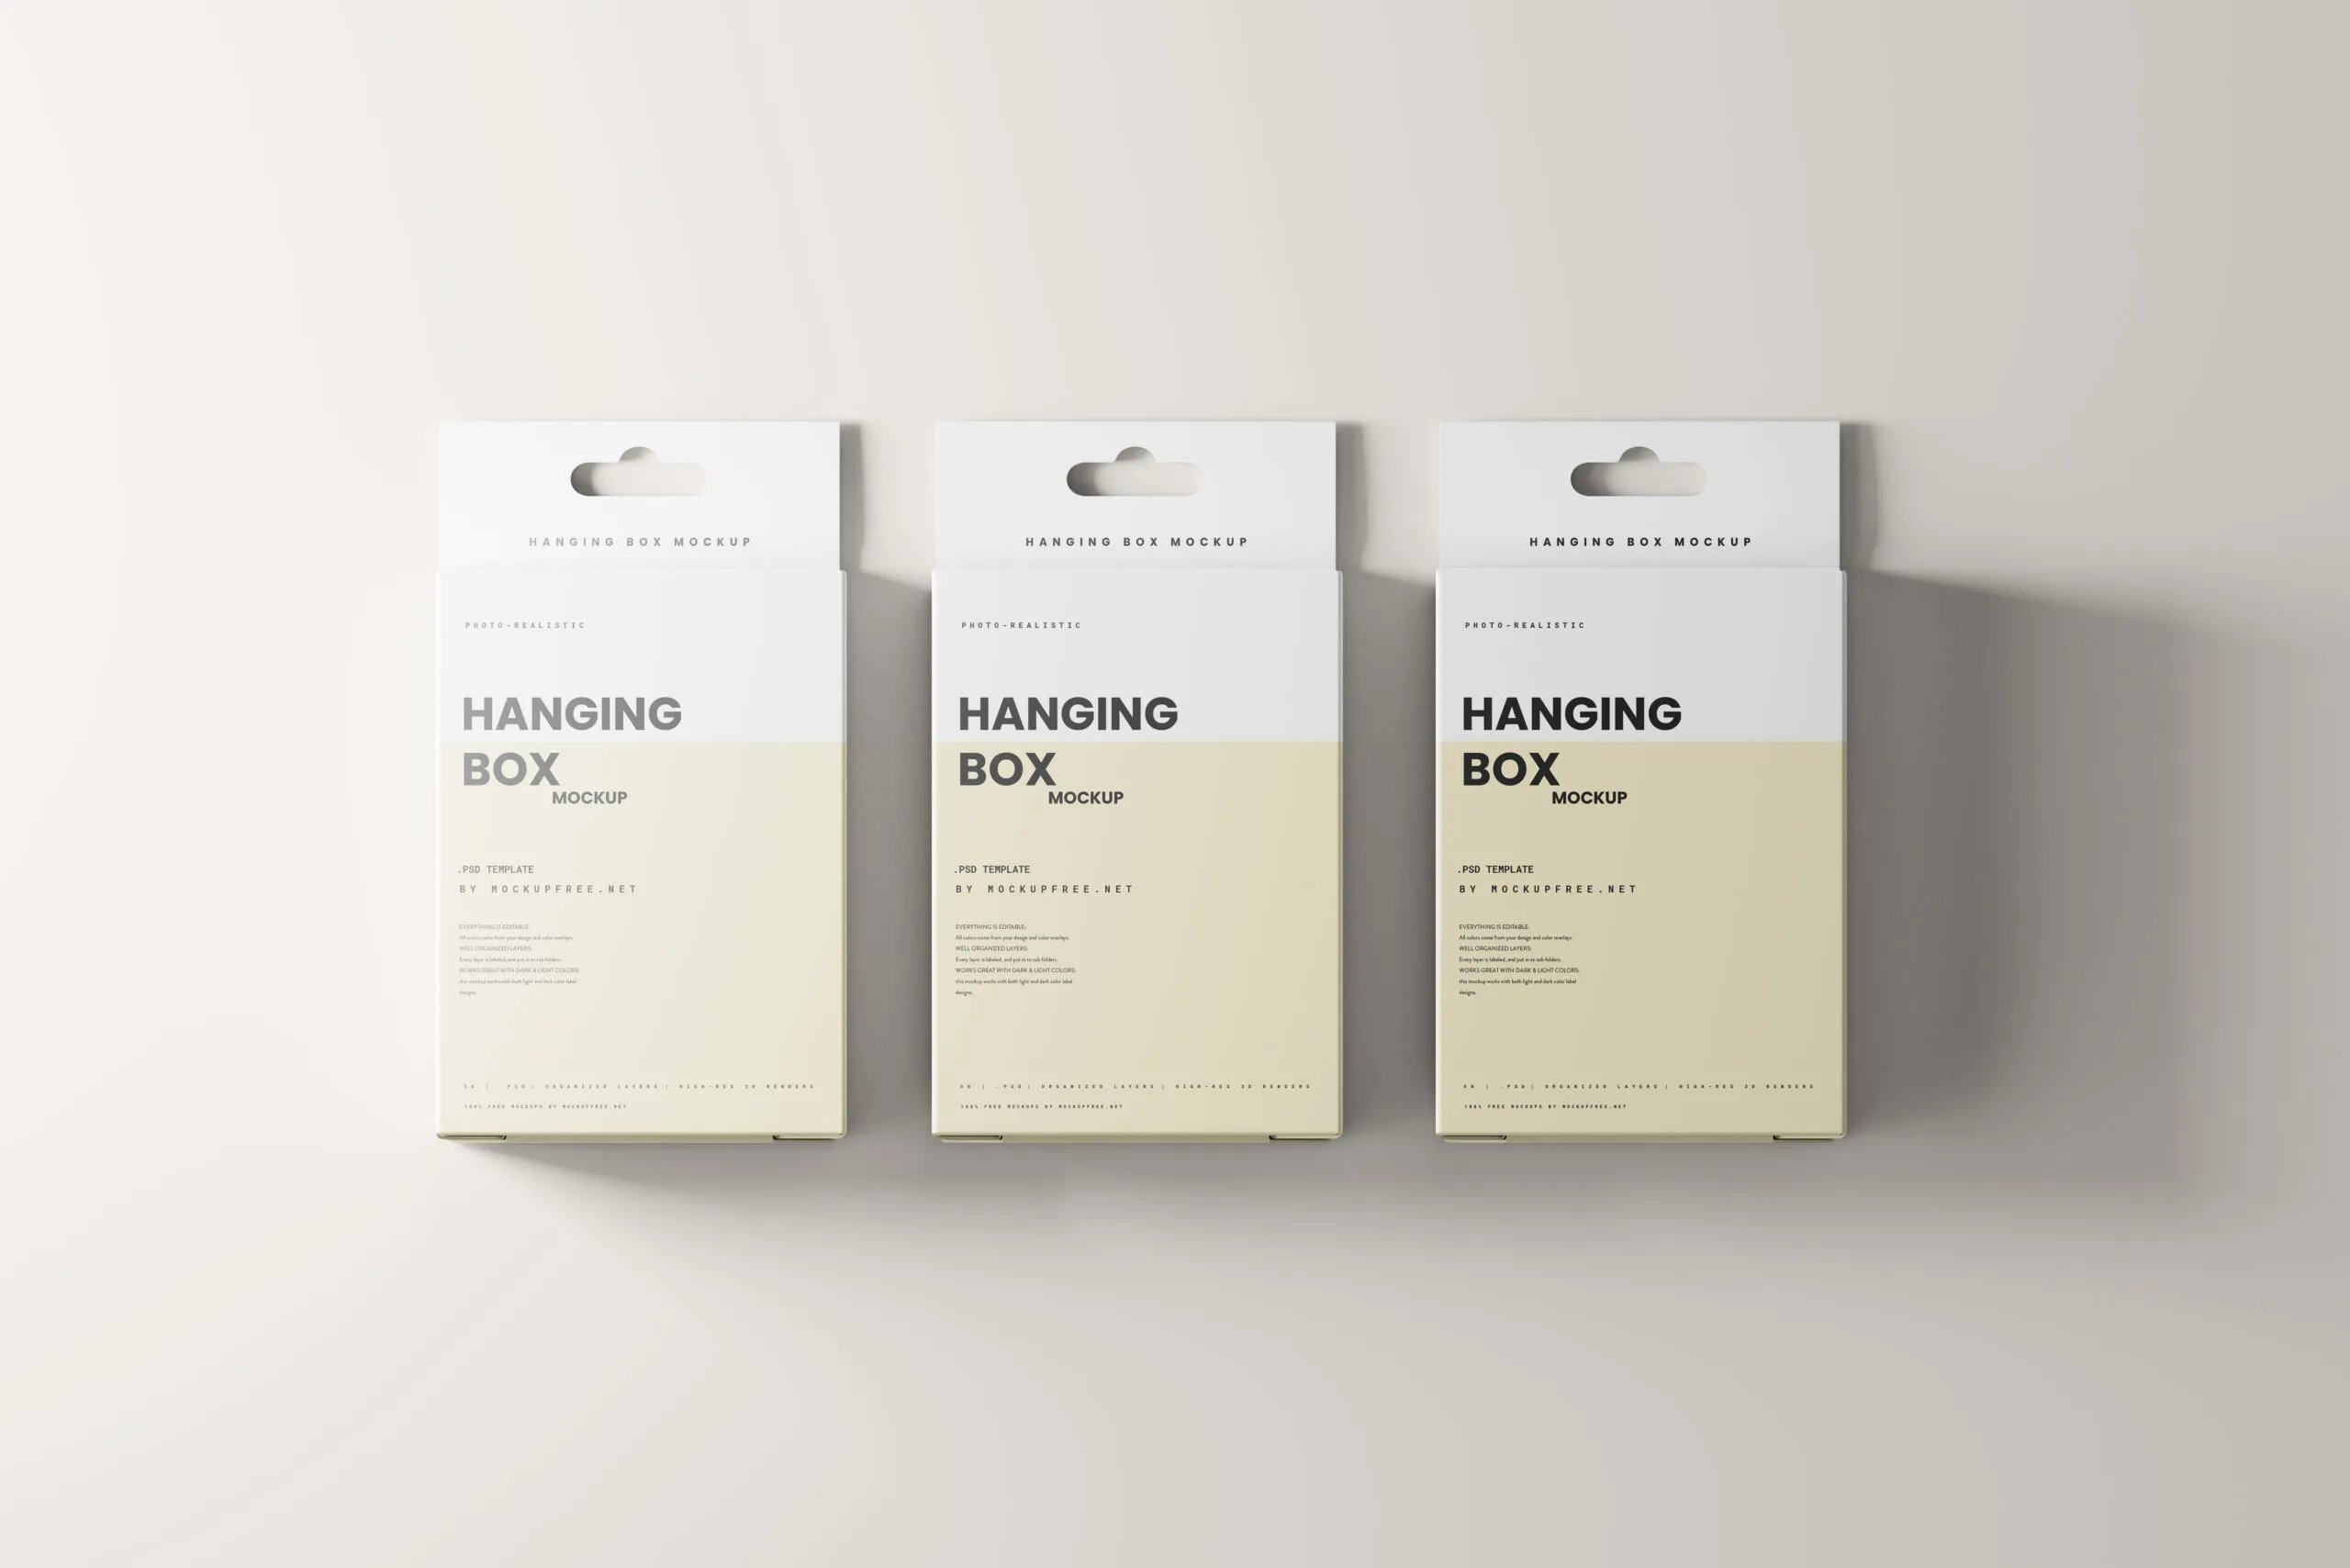 10 Mockups of Hanging Boxes in Varied Visions FREE PSD